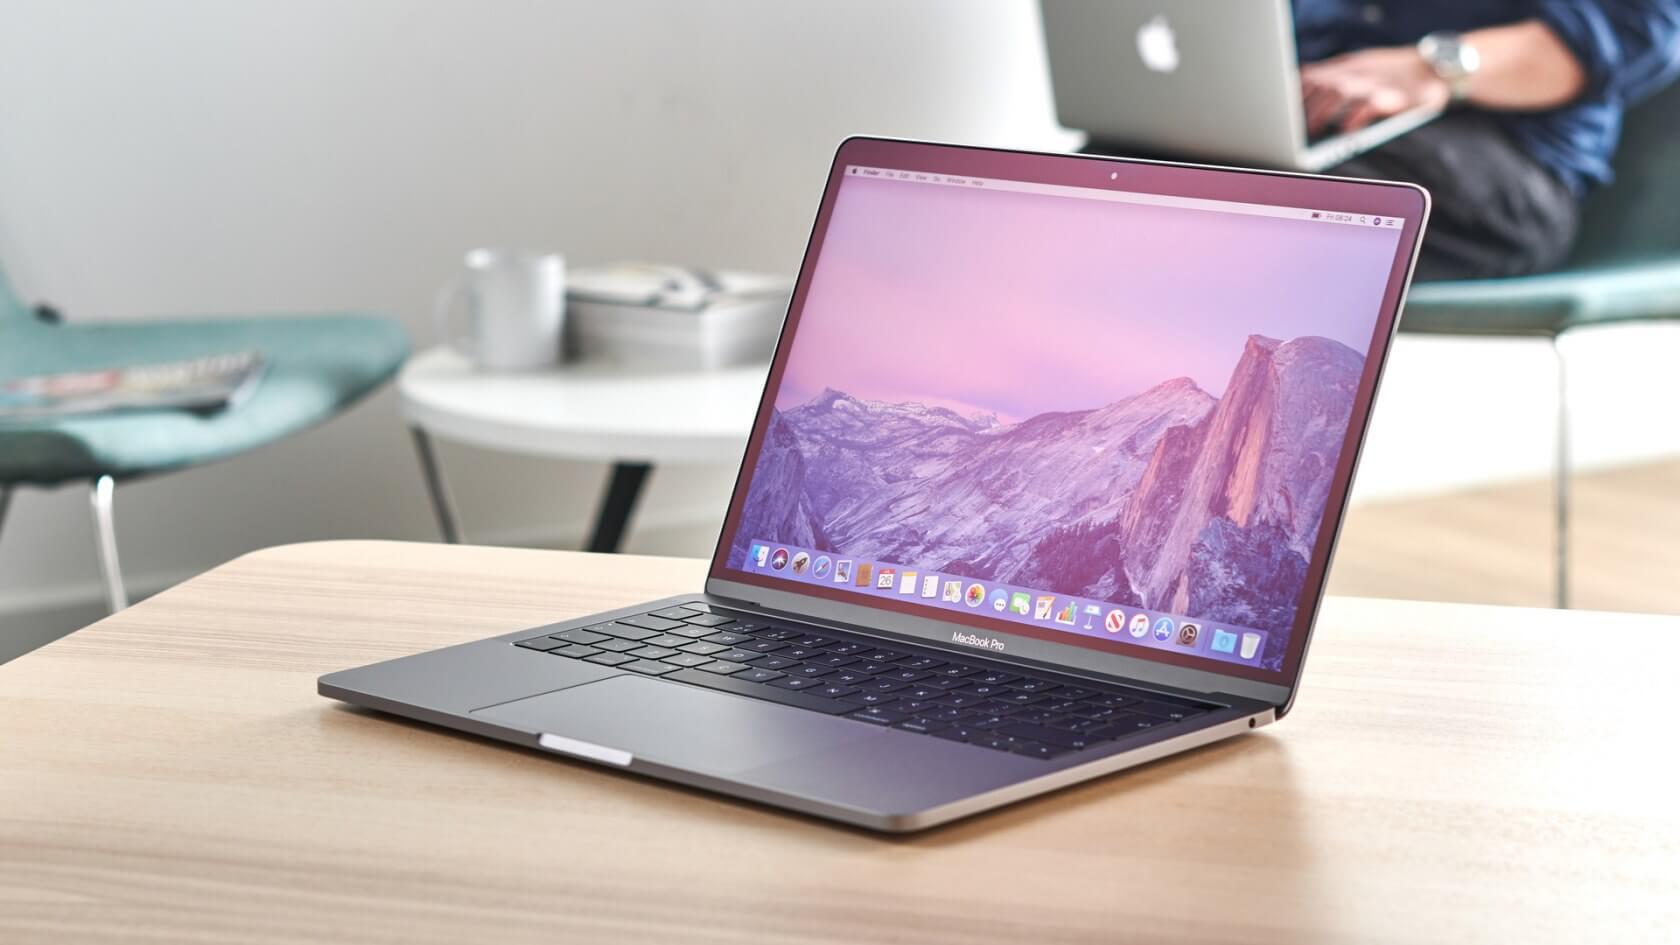 A new MacBook could be in the works, according to Apple regulatory filing